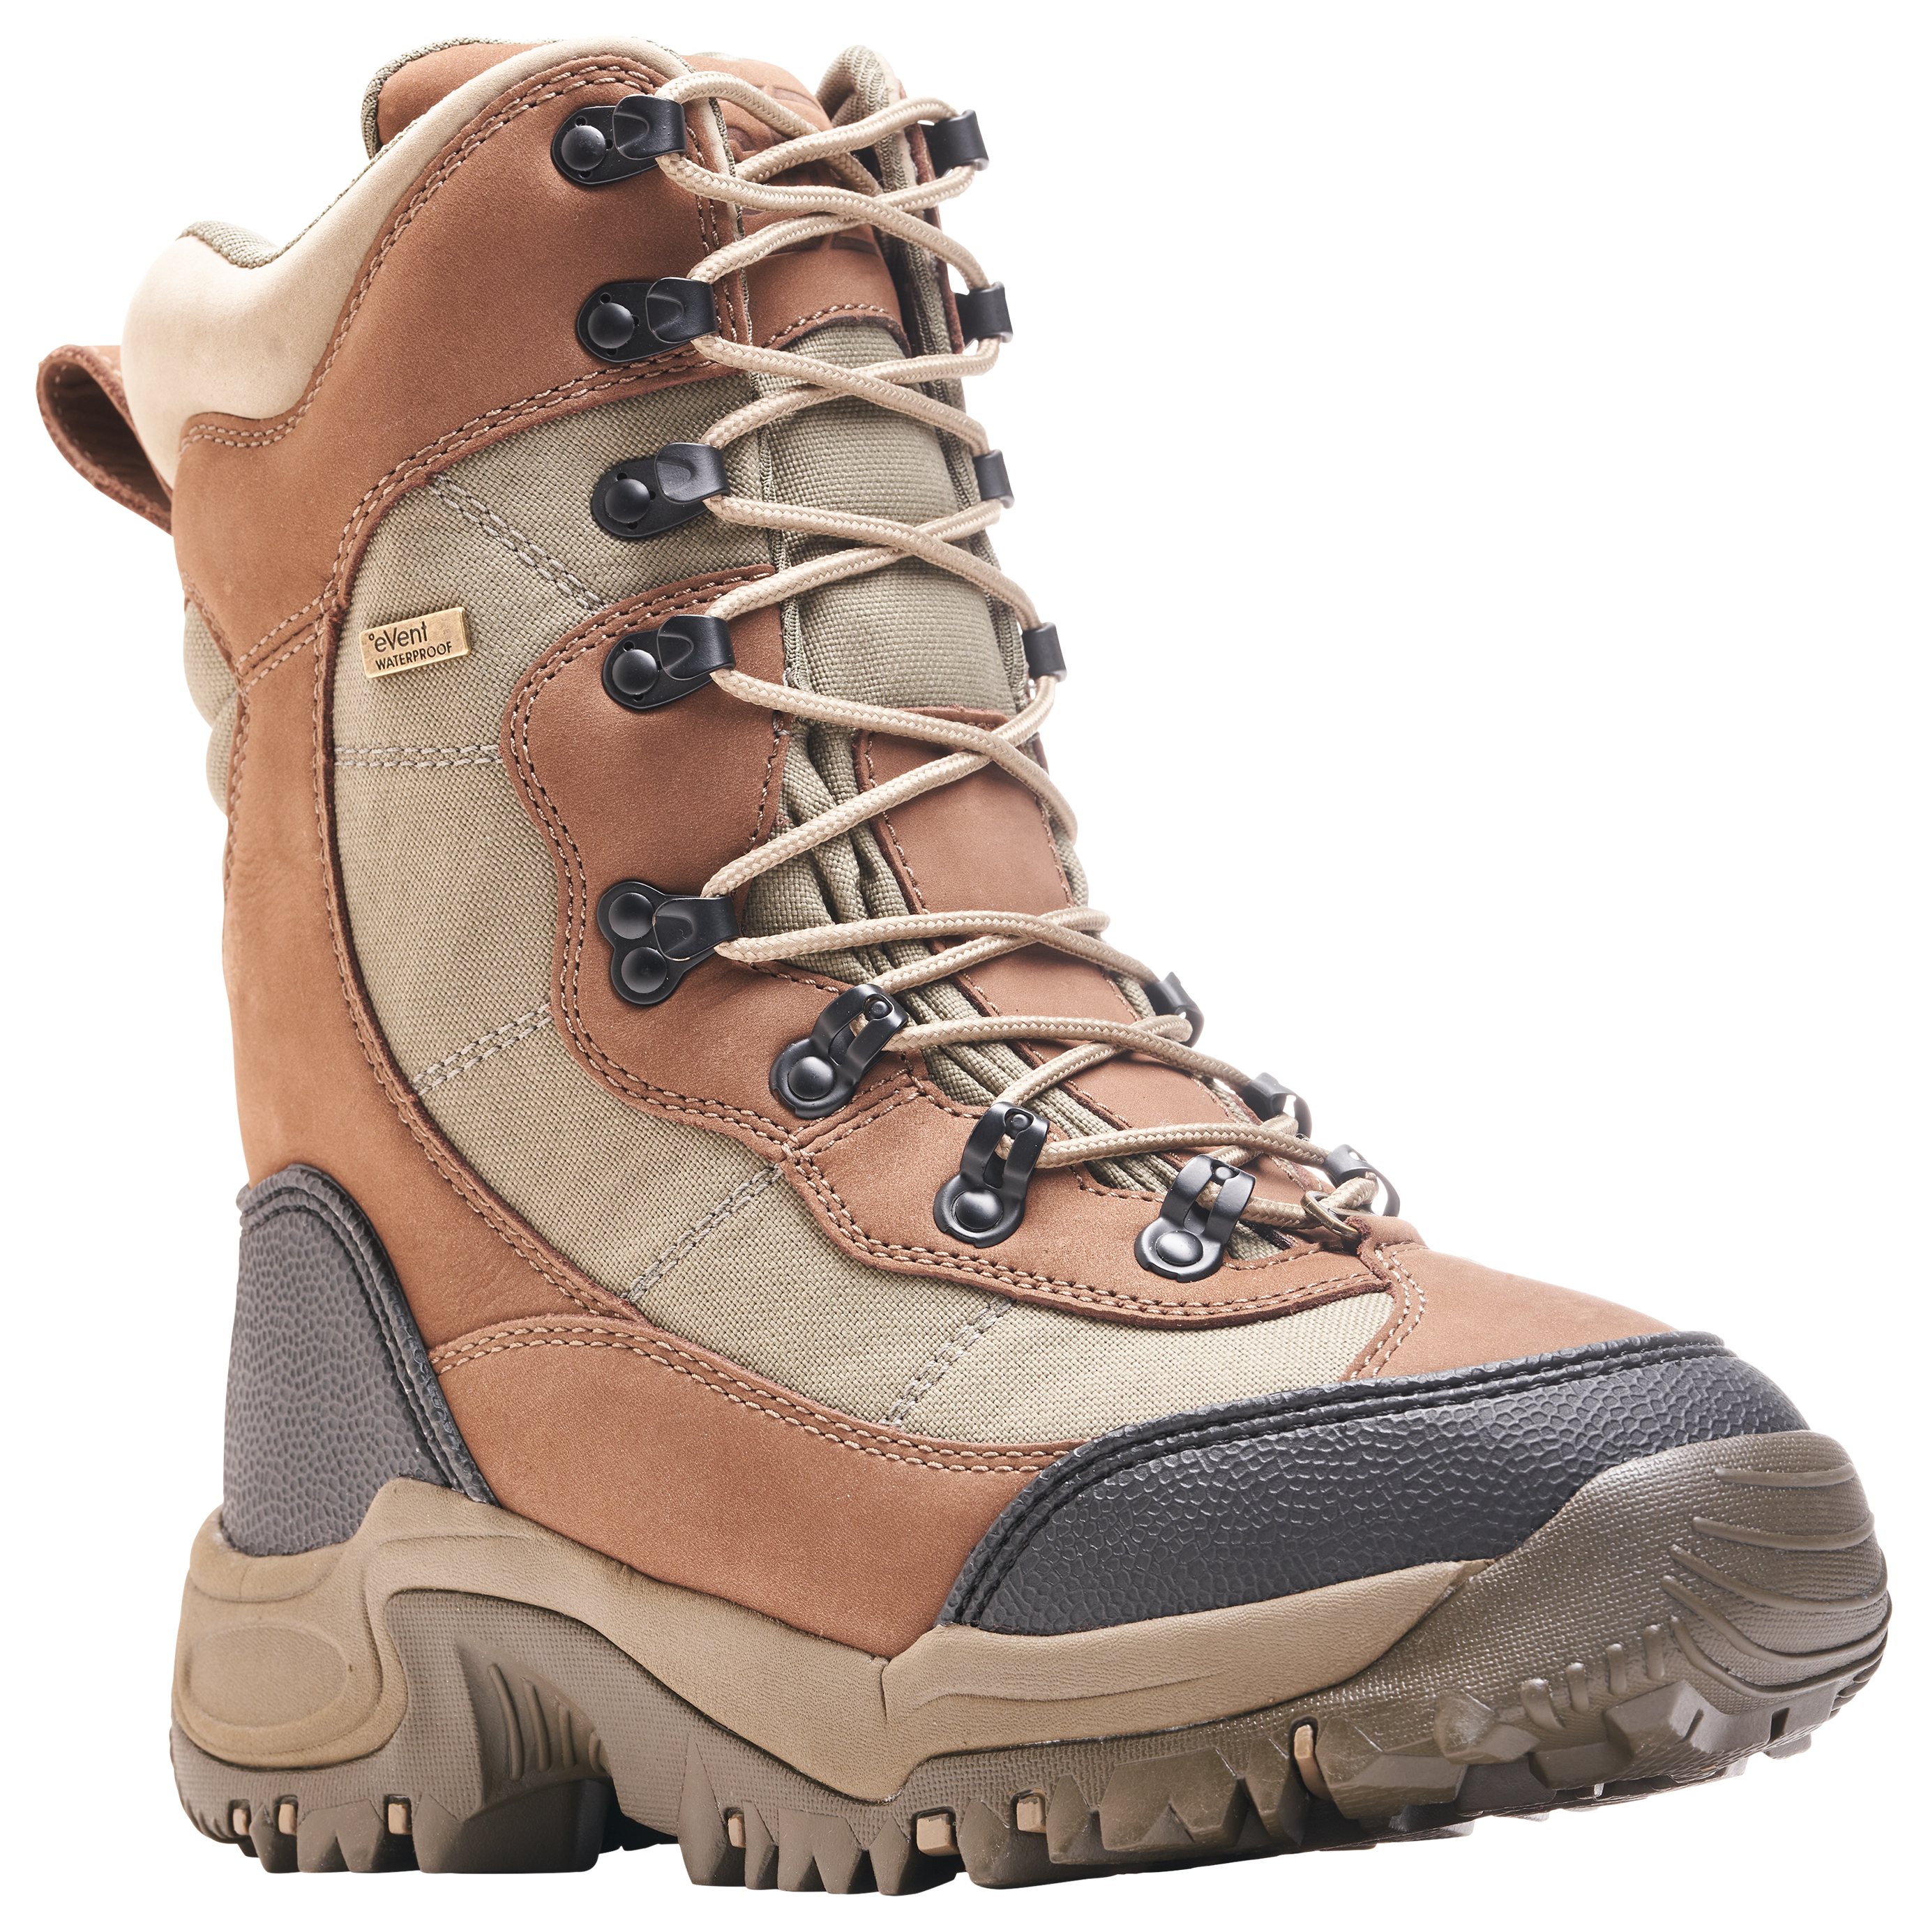 SHE Outdoor Inferno II Insulated Waterproof Hunting Boots for Ladies - Brown - 6M